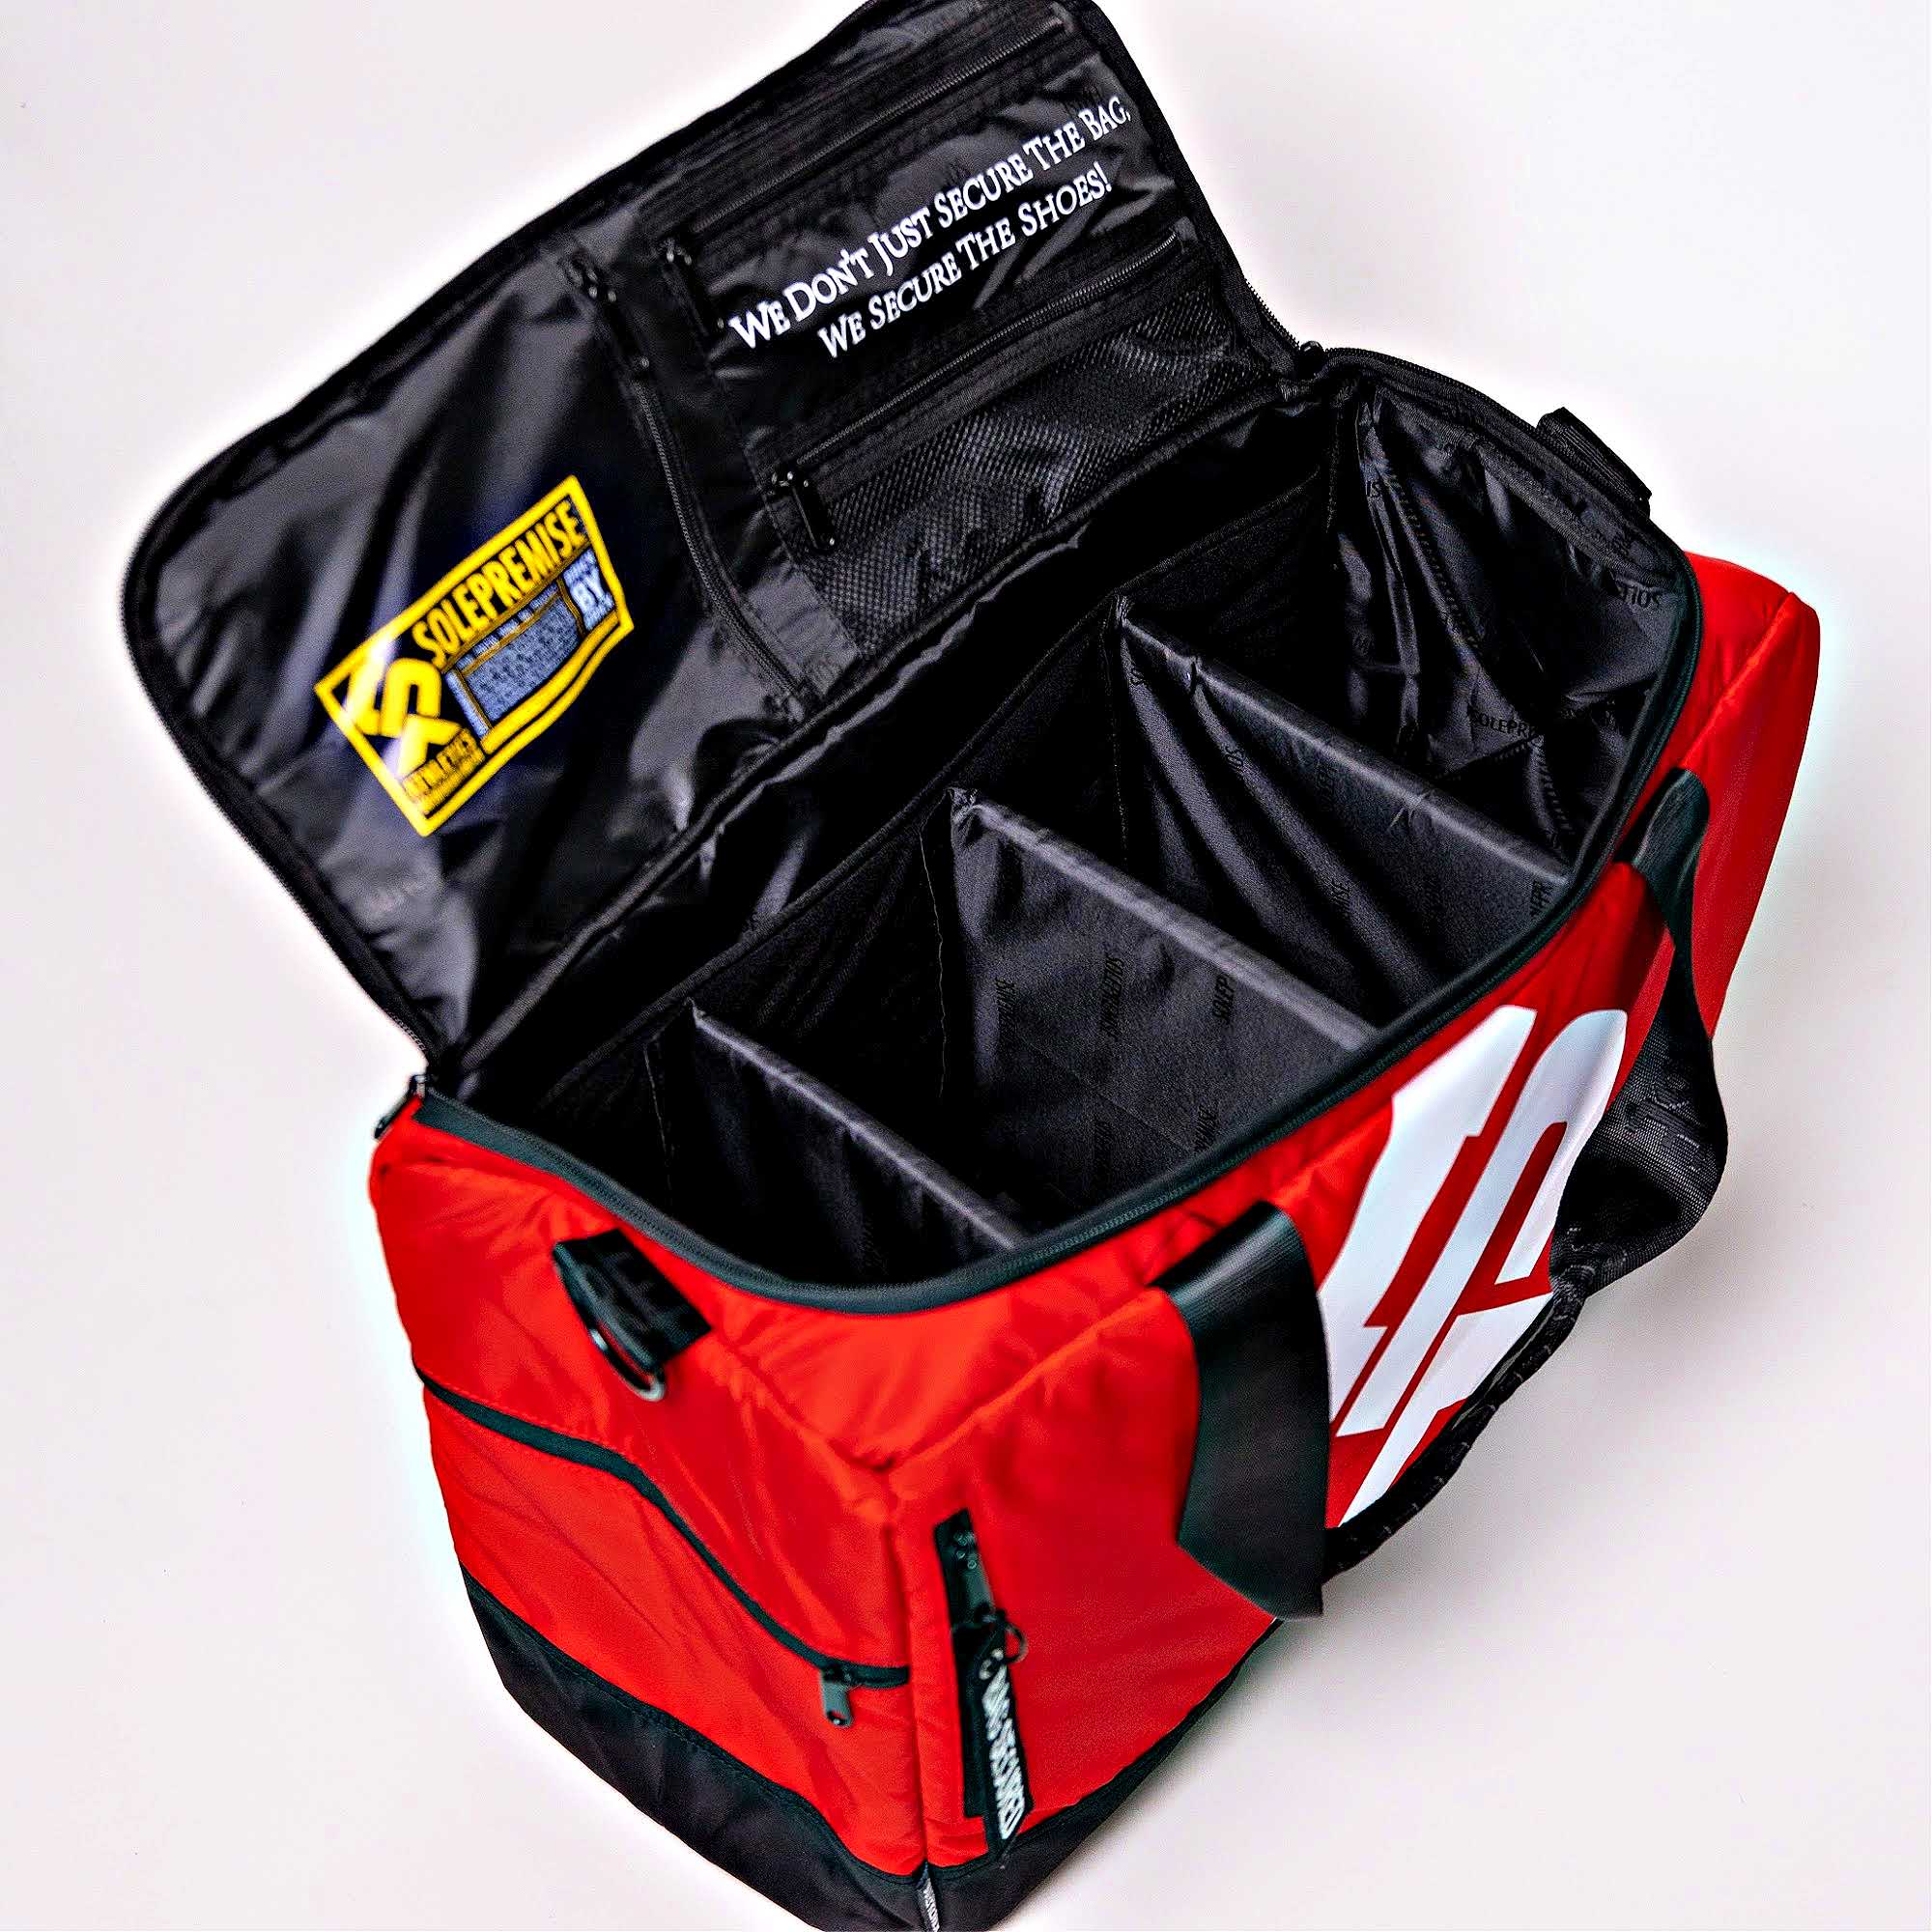 Multiple compartment Sneaker bag